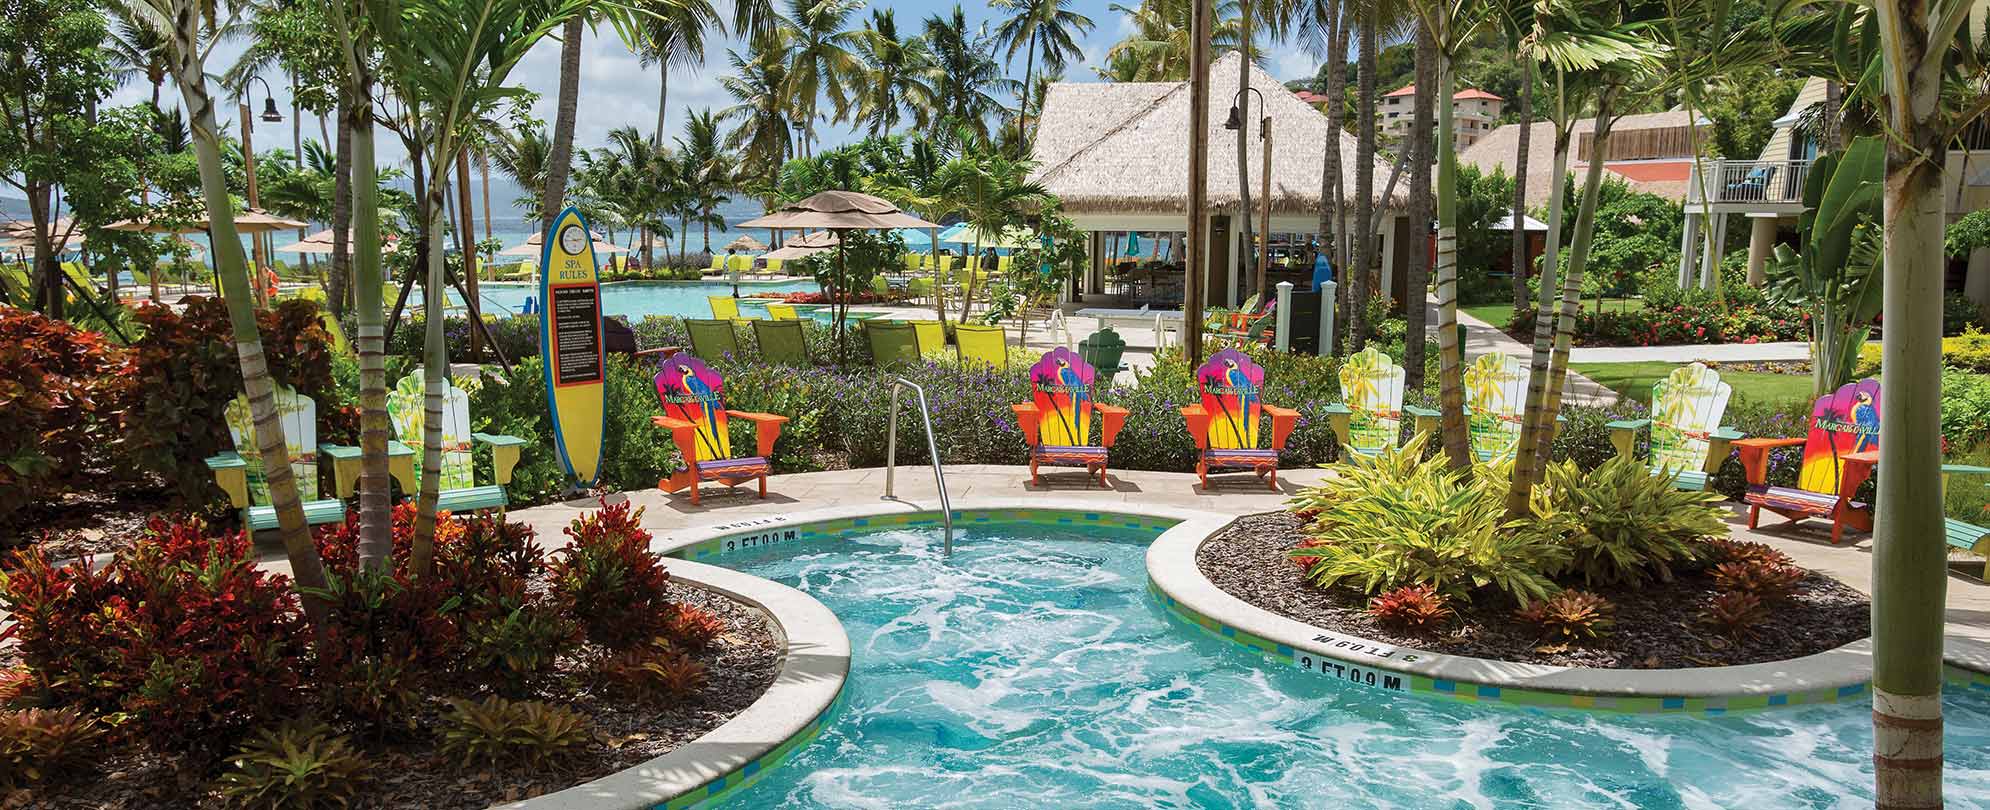 Colorful adirondack chairs surround a jetted hot tub at Margaritaville Vacation Club by Wyndham - St. Thomas.